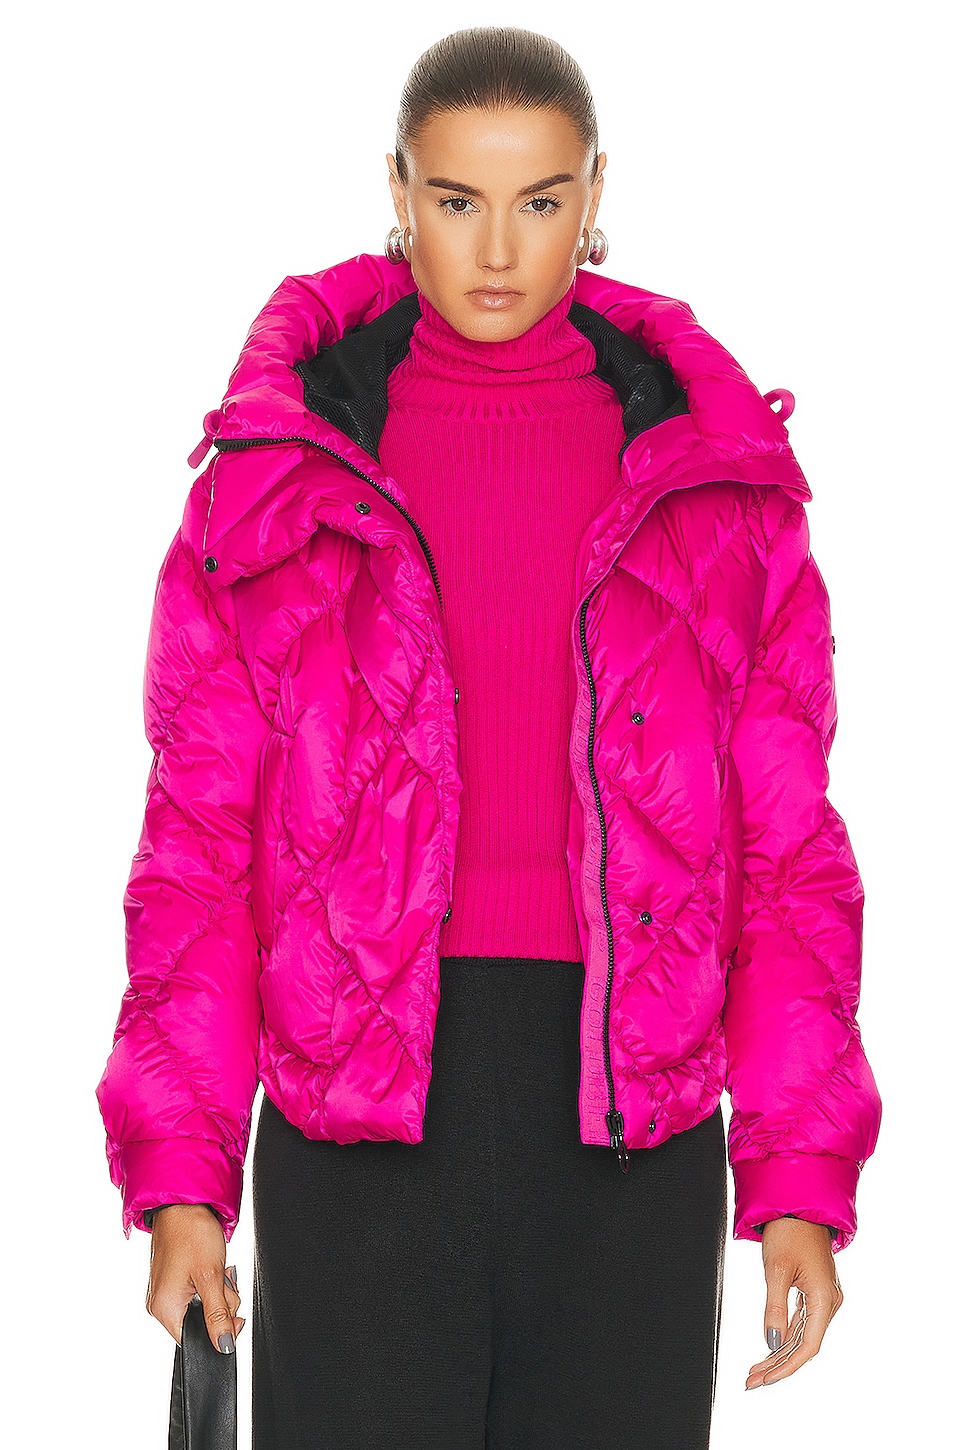 Goldbergh Fiona Jacket in Passion Pink | FWRD